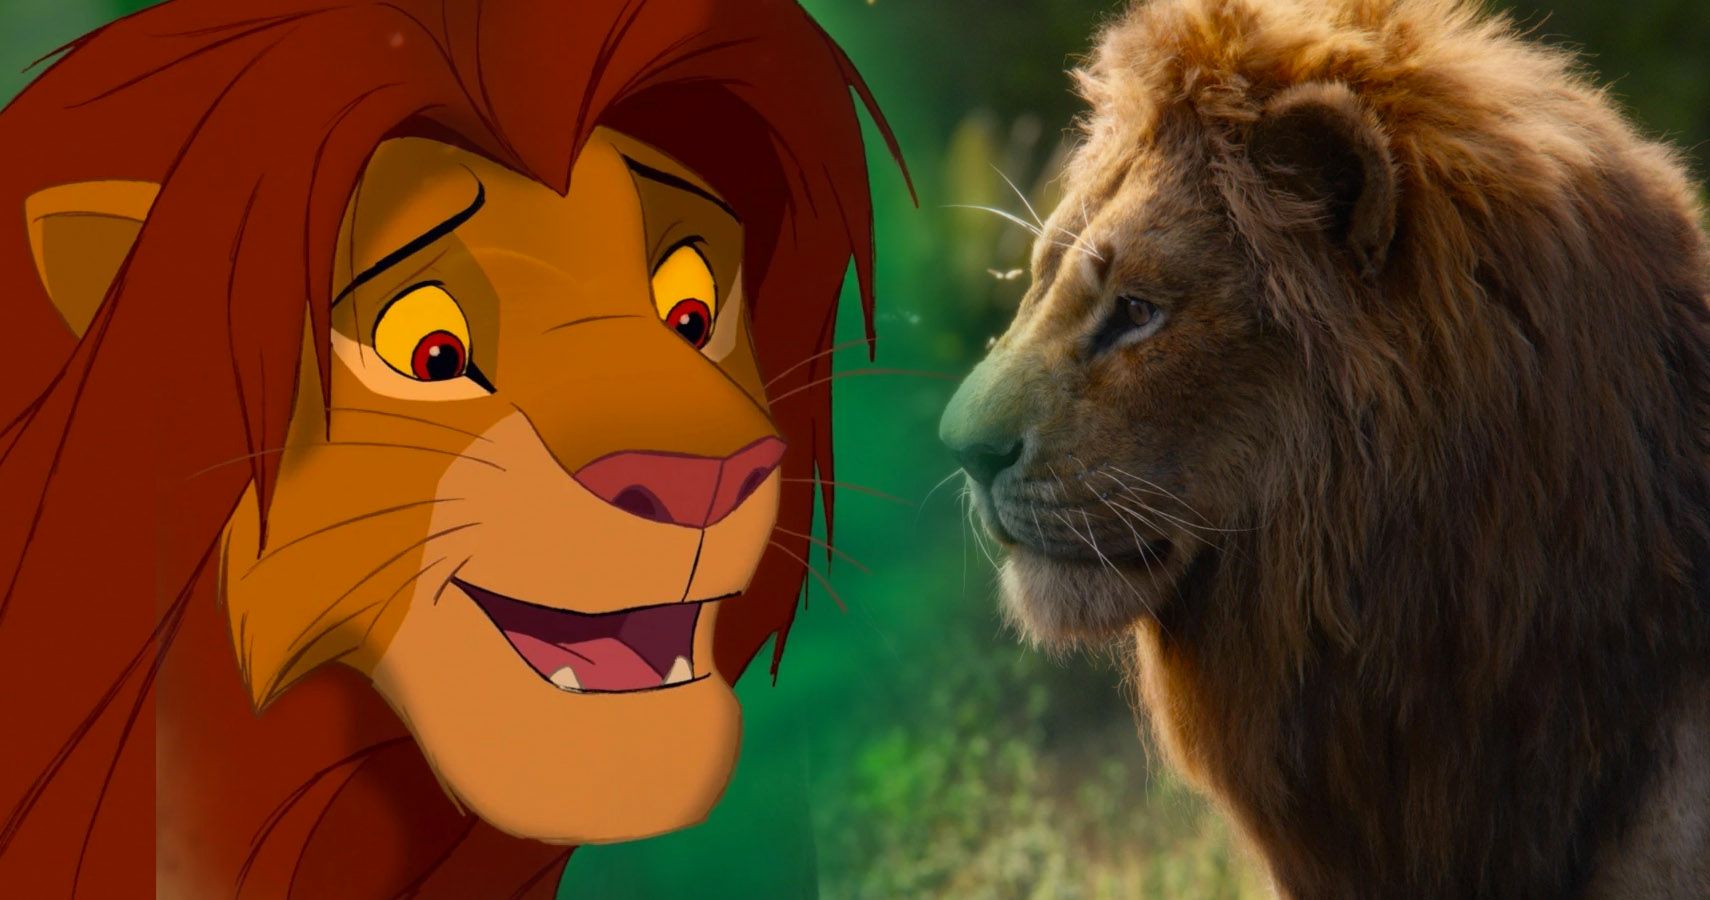 The Lion King: 10 Things You Didn't Know About Simba